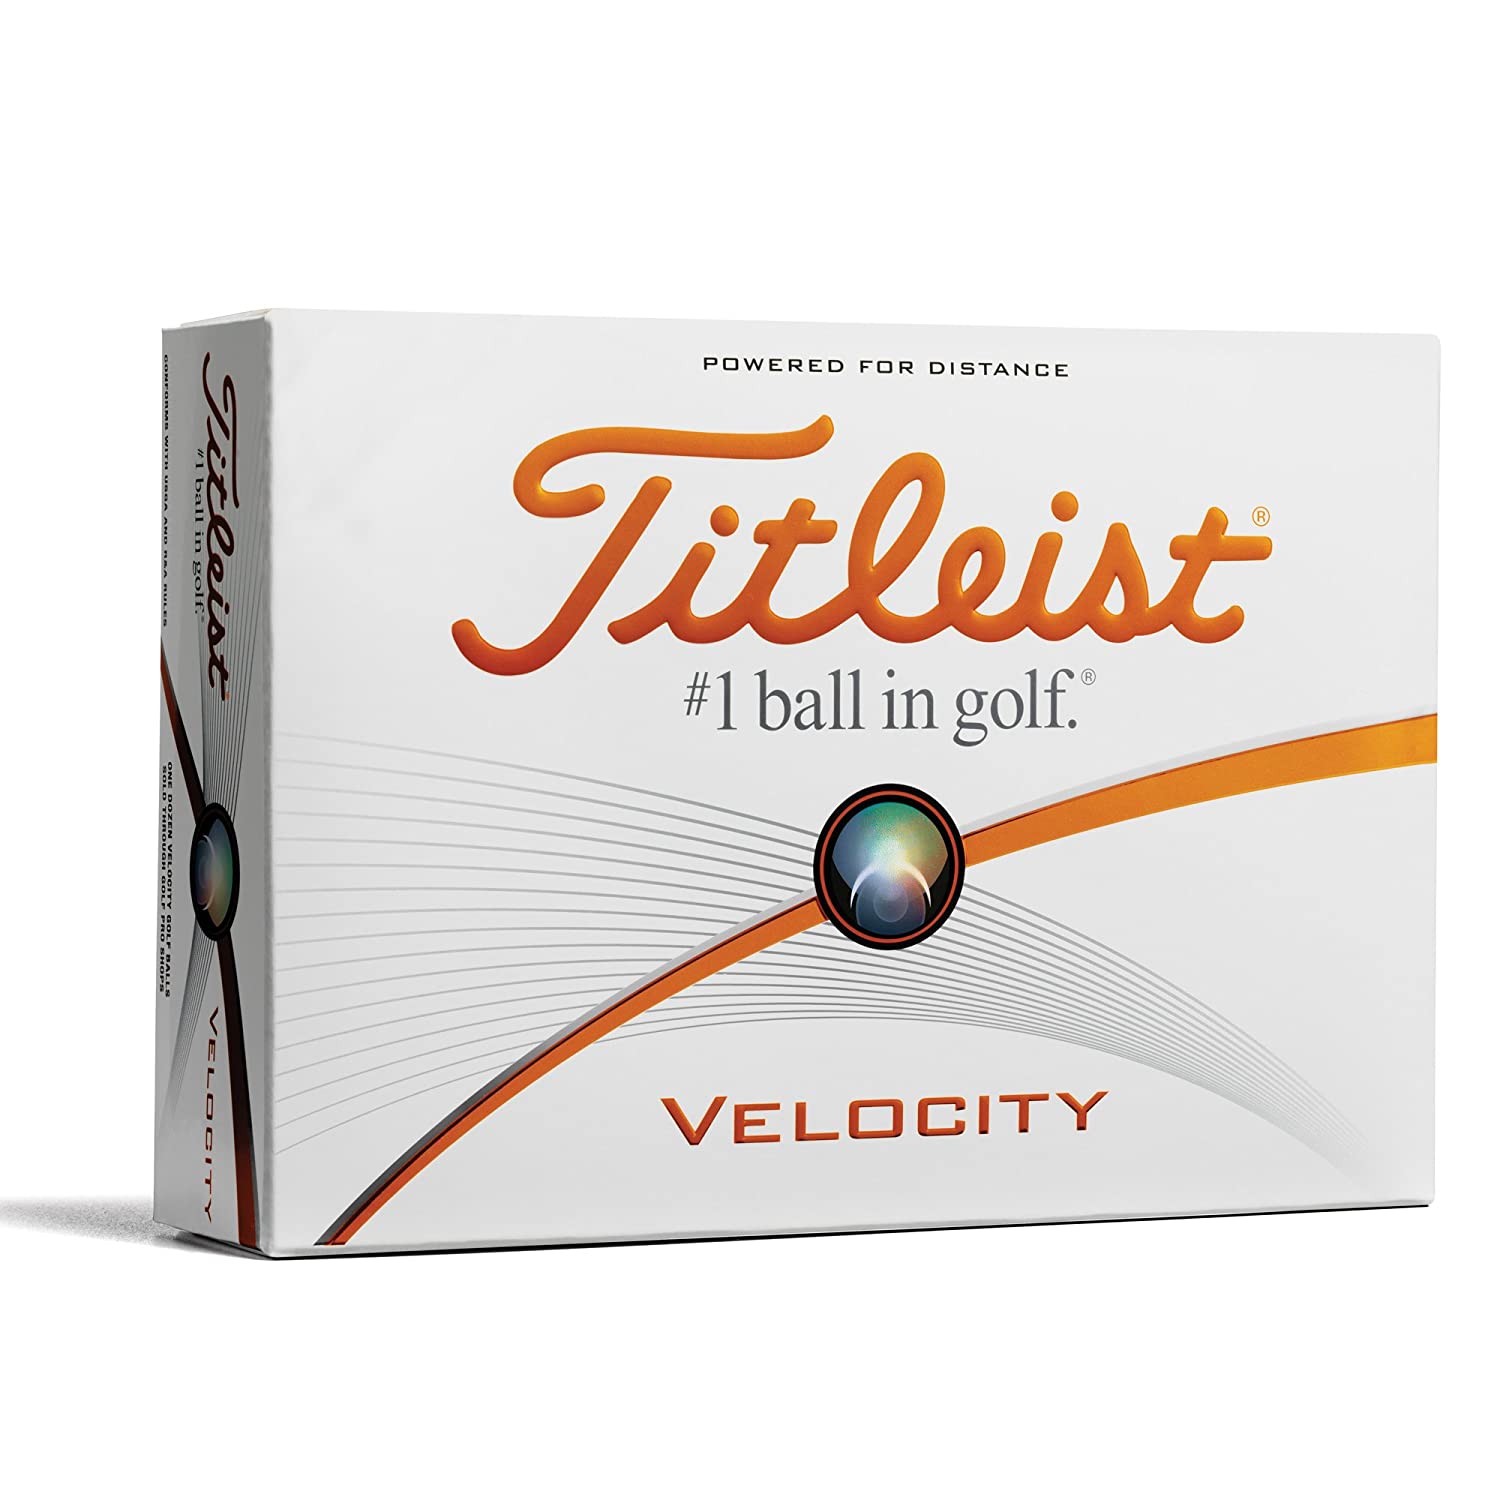 Titleist velocity review